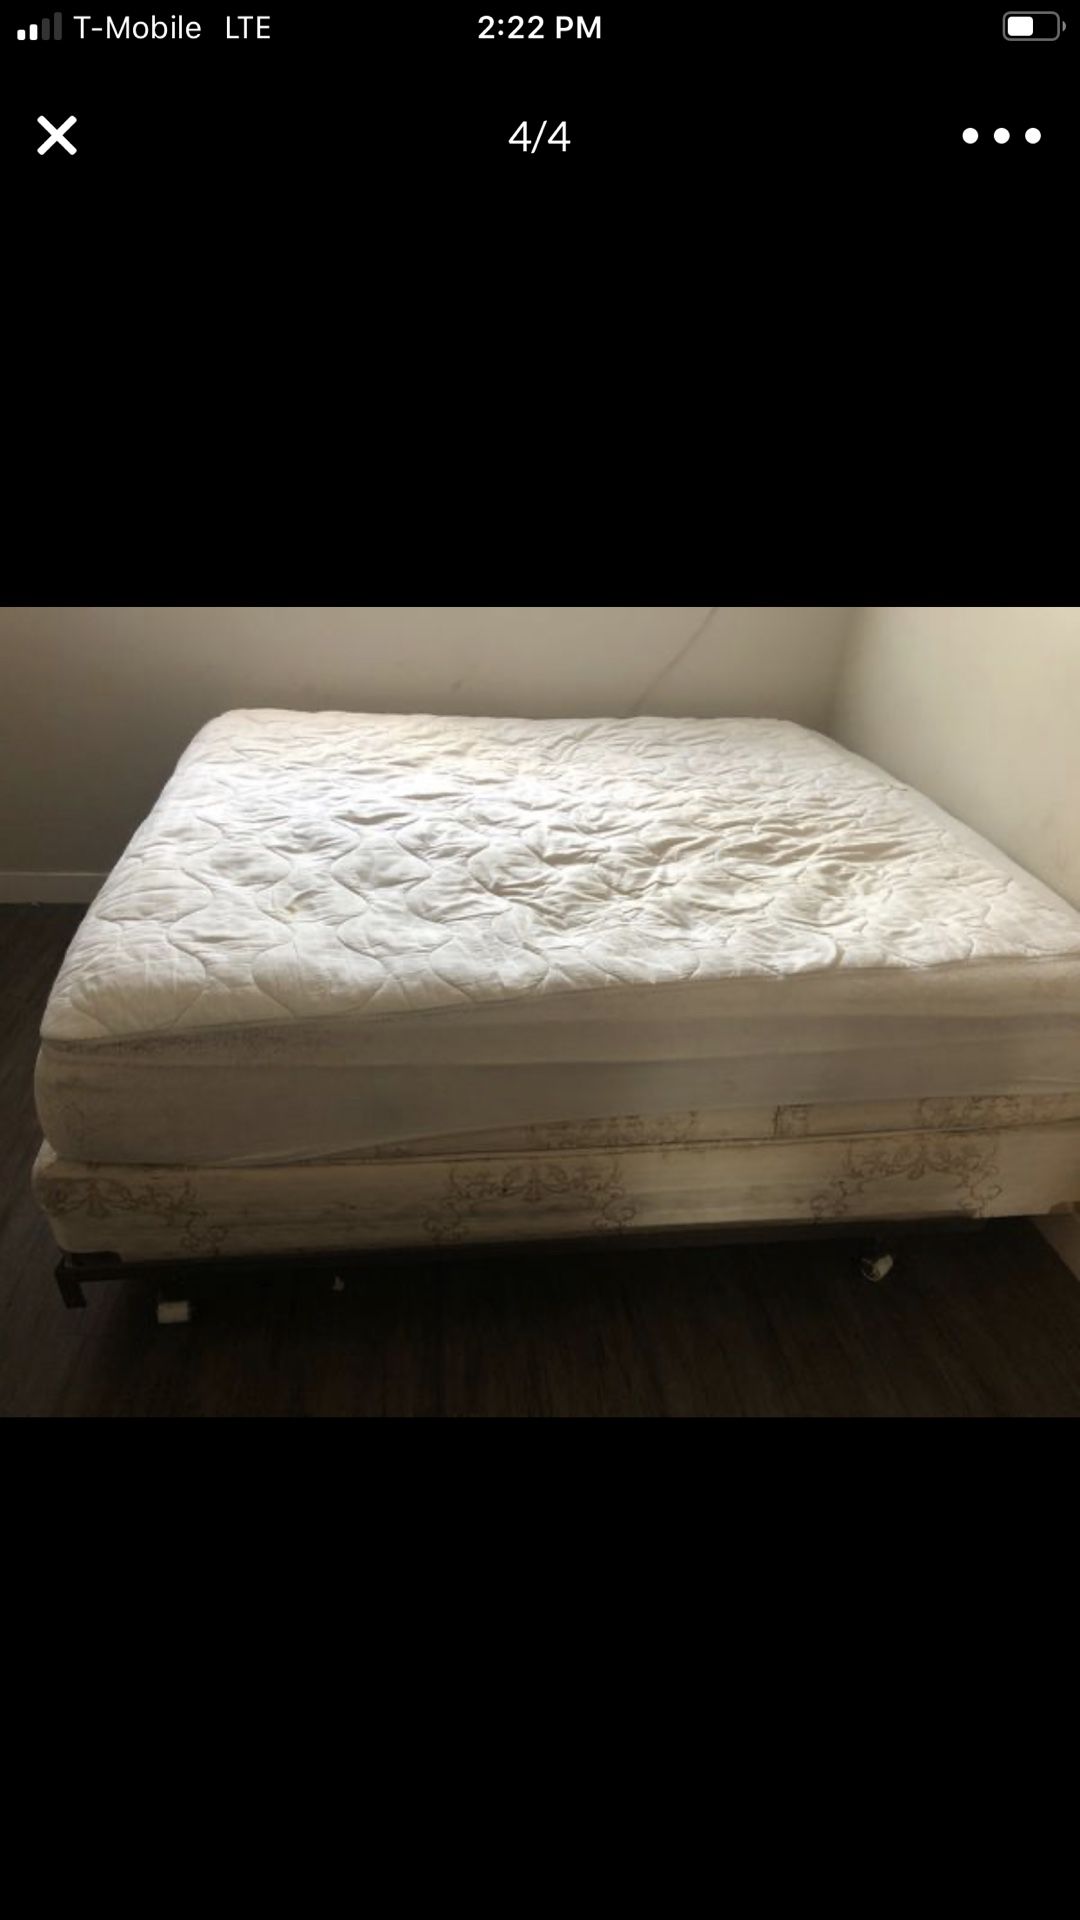 Cali king bed frame and mattress 200$ retail price over 3000 moving out need sold ASAP